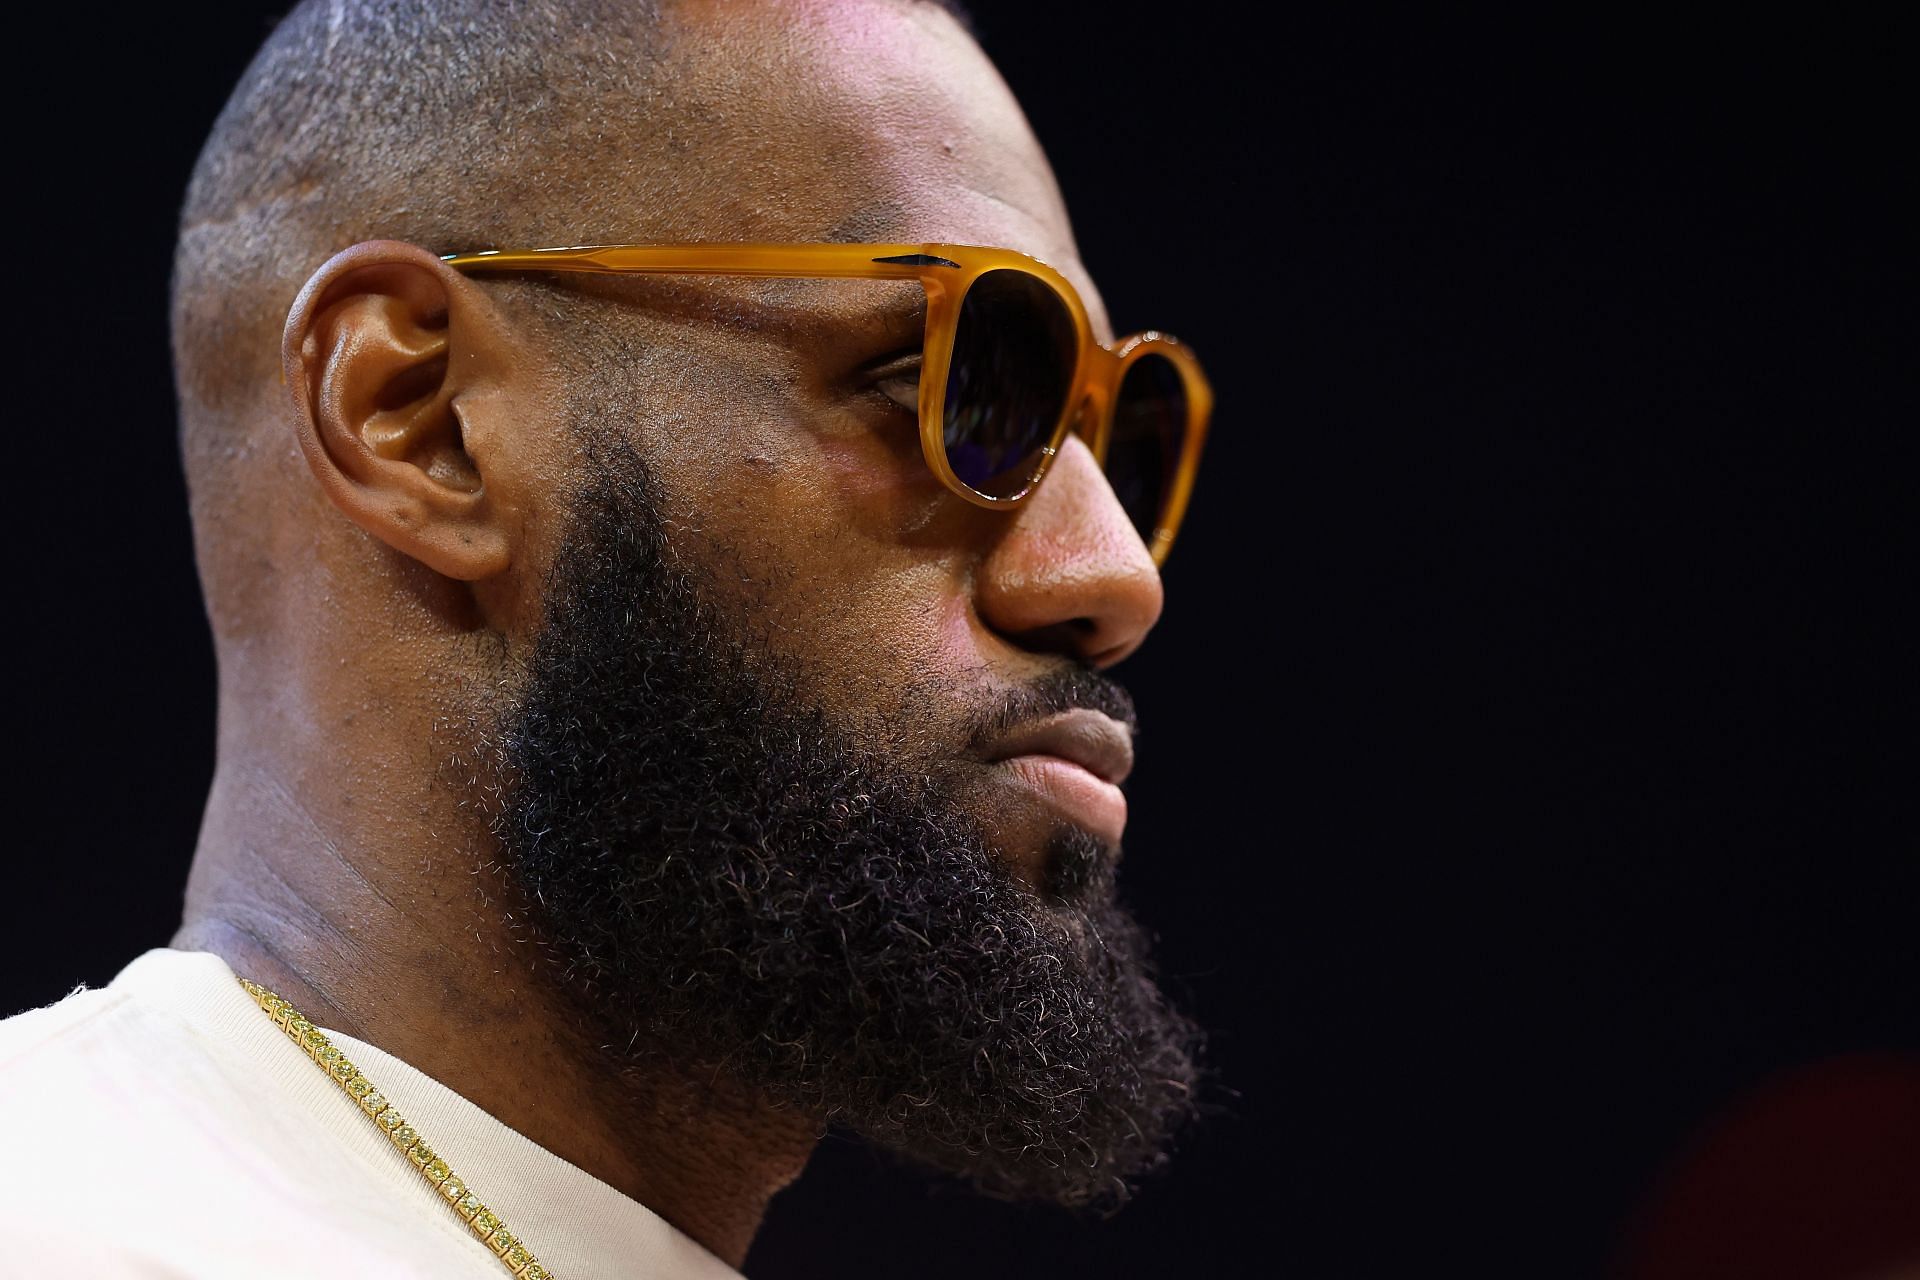 LeBron James possibly received a veiled diss from LA Lakers owner Jeanie Buss in her Kobe Bryant praise.